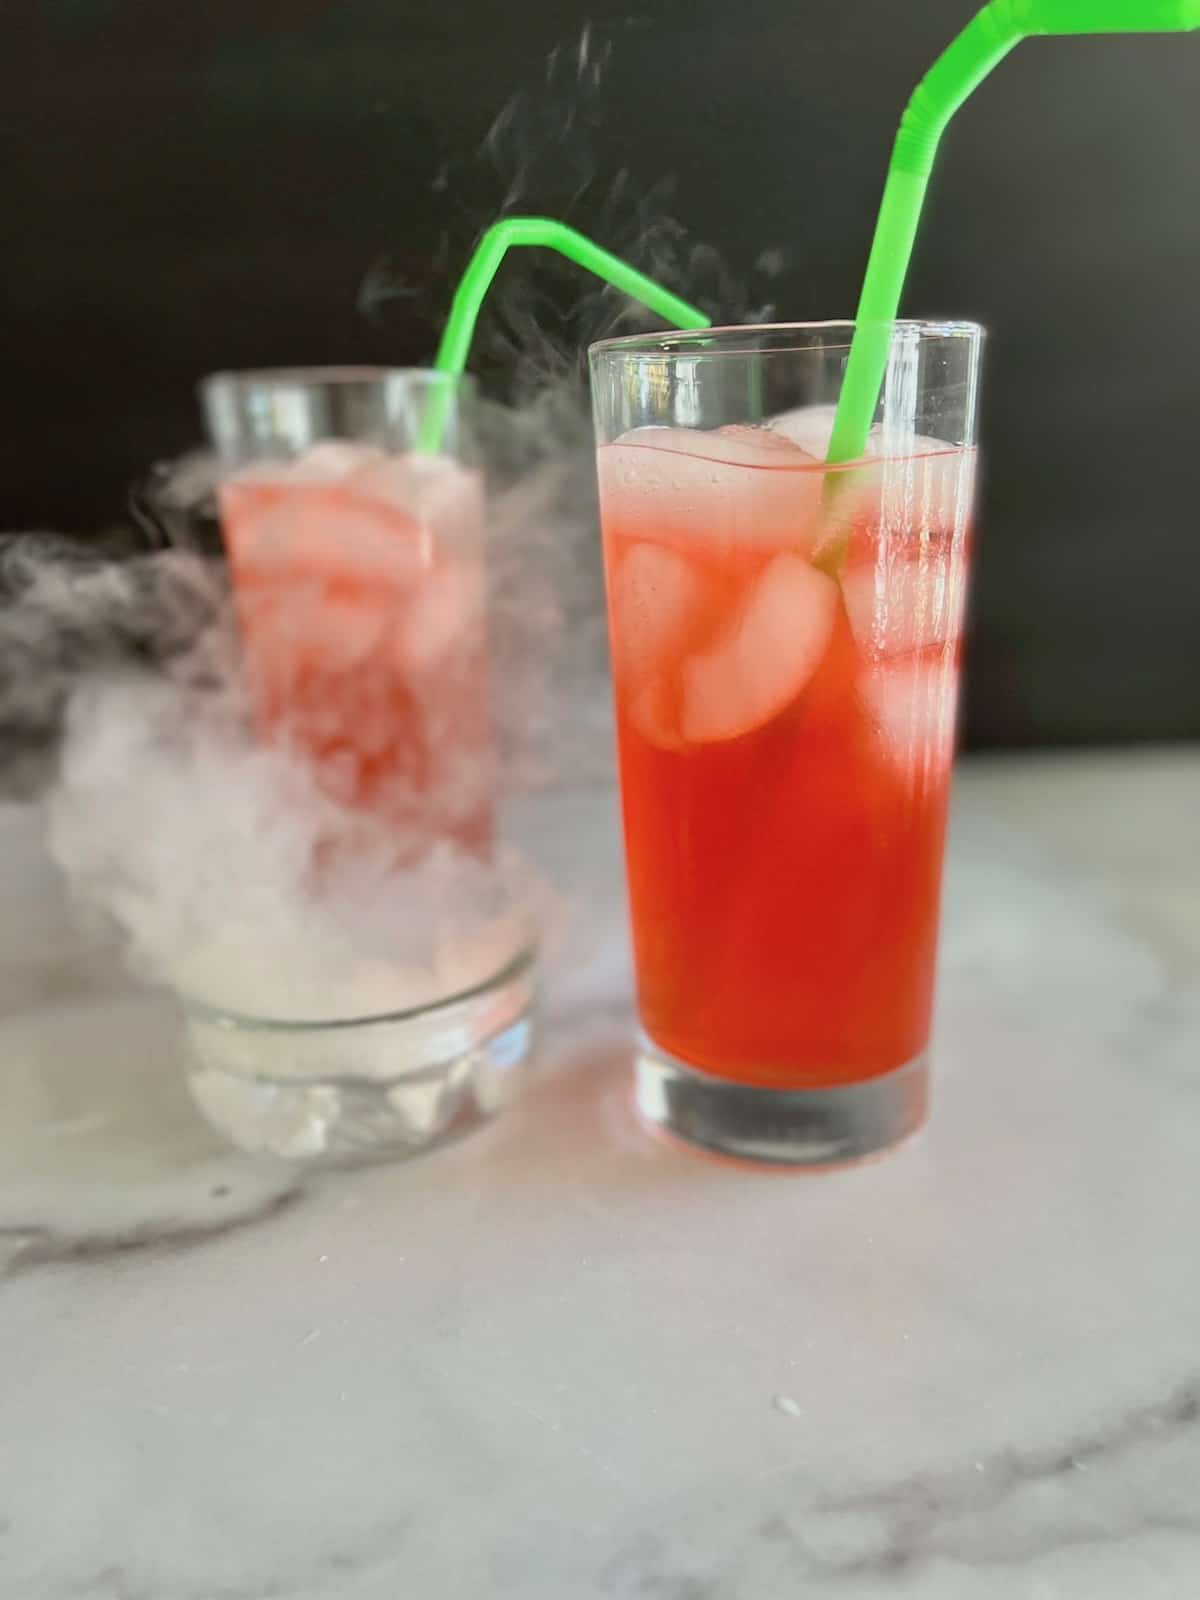 A small dish with dry ice starting to fog up like smoke next to drinks.